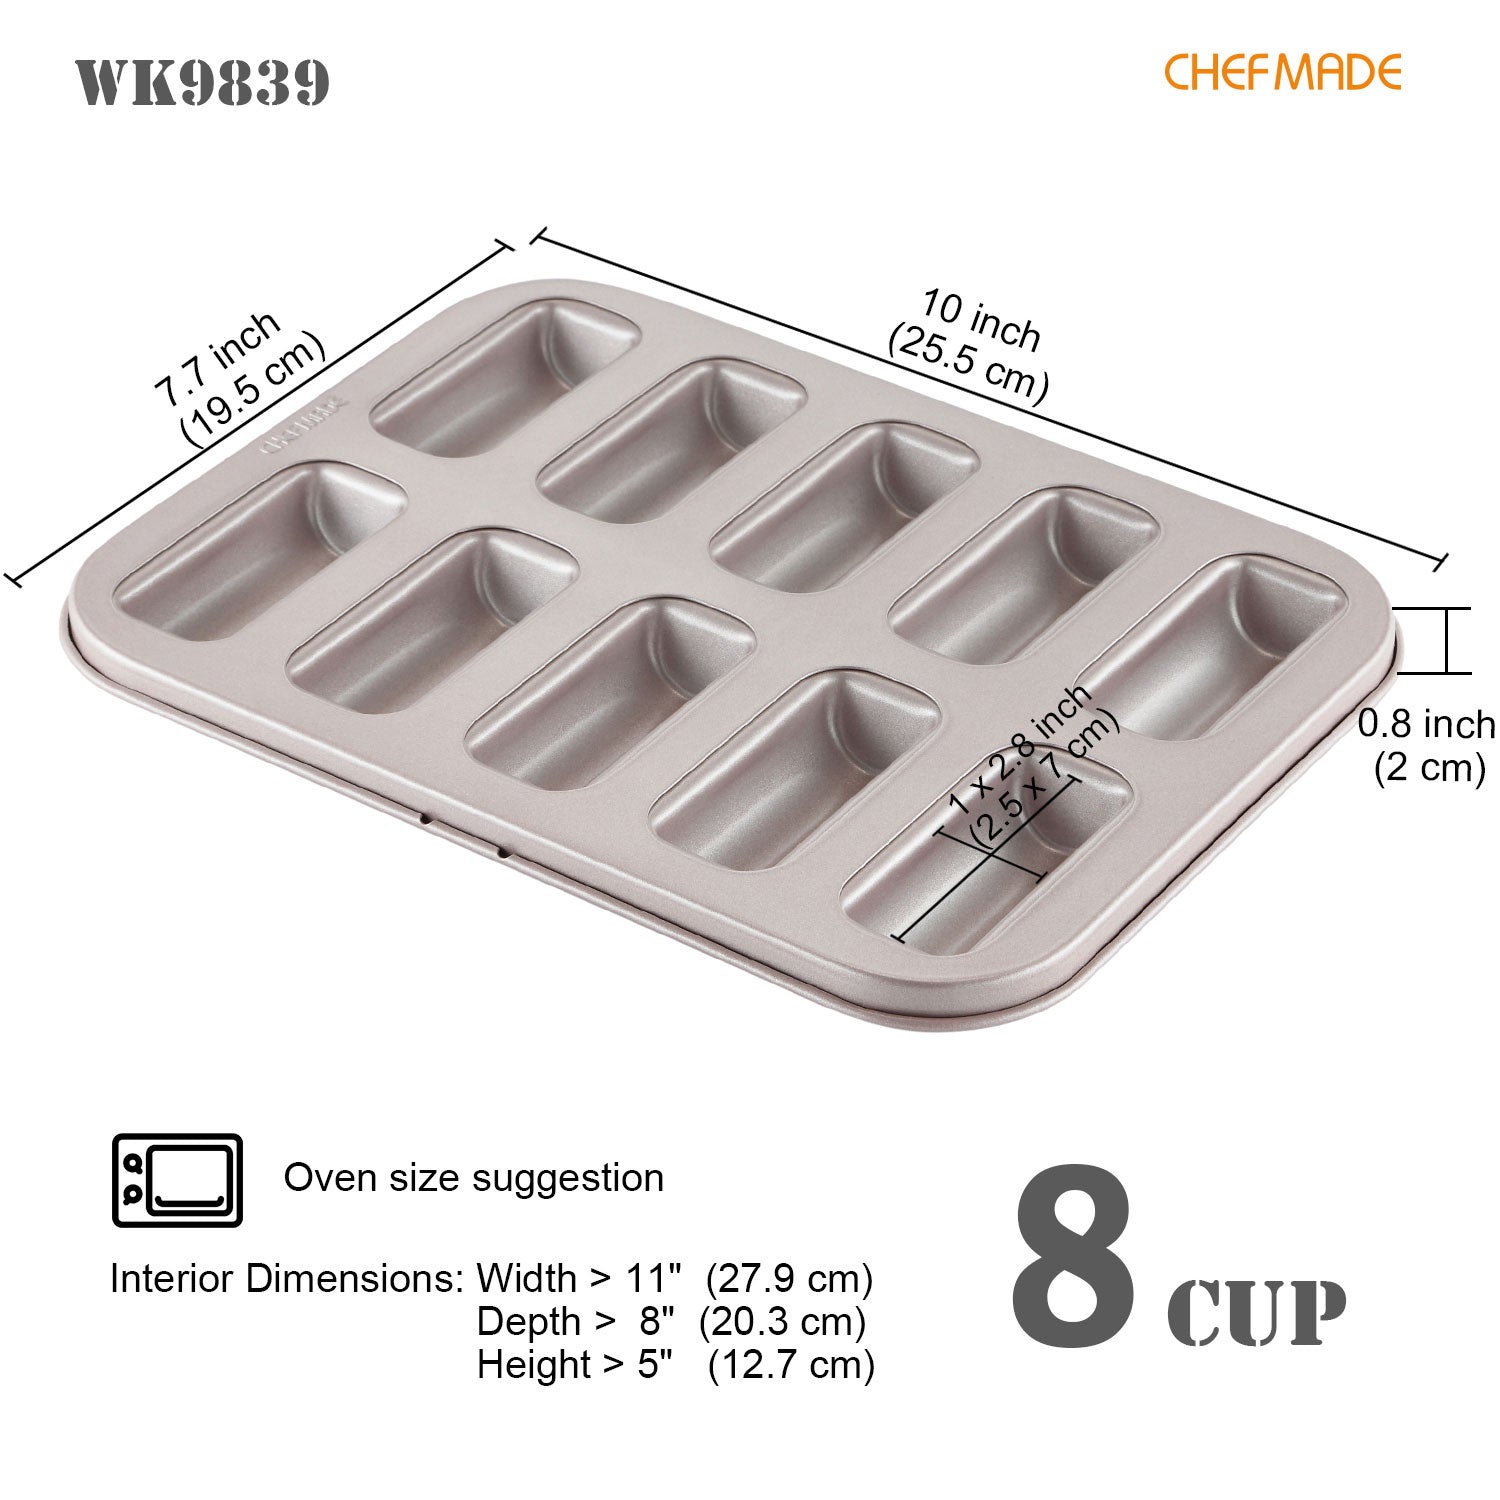 Financier Cake Pan 10 Well - CHEFMADE official store